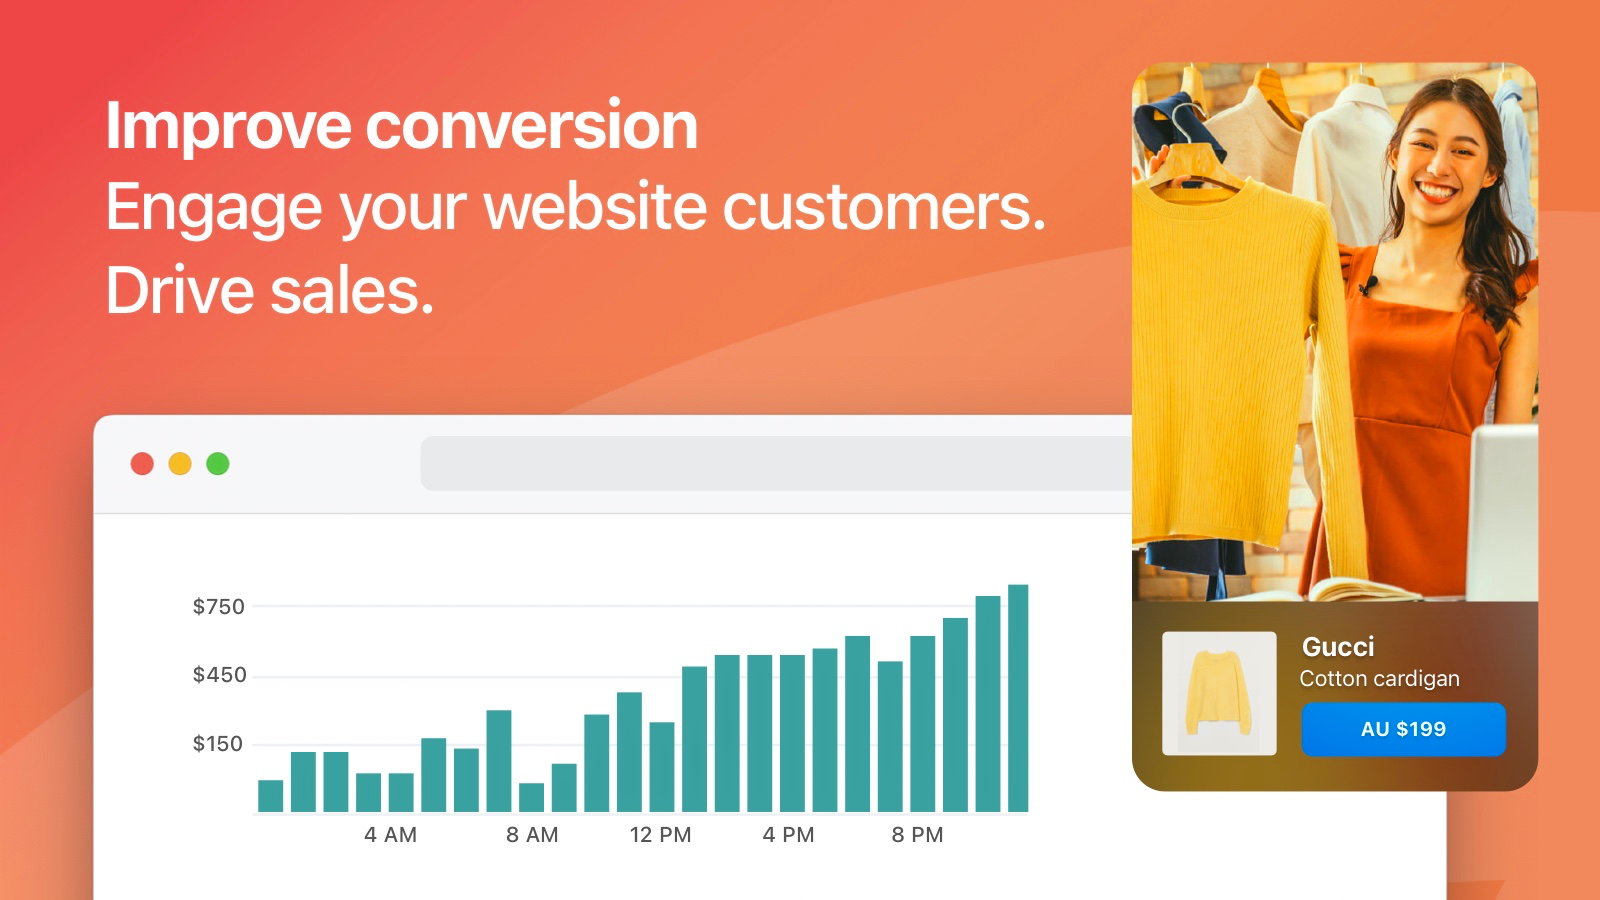 Improve conversion. Engage your website customers.